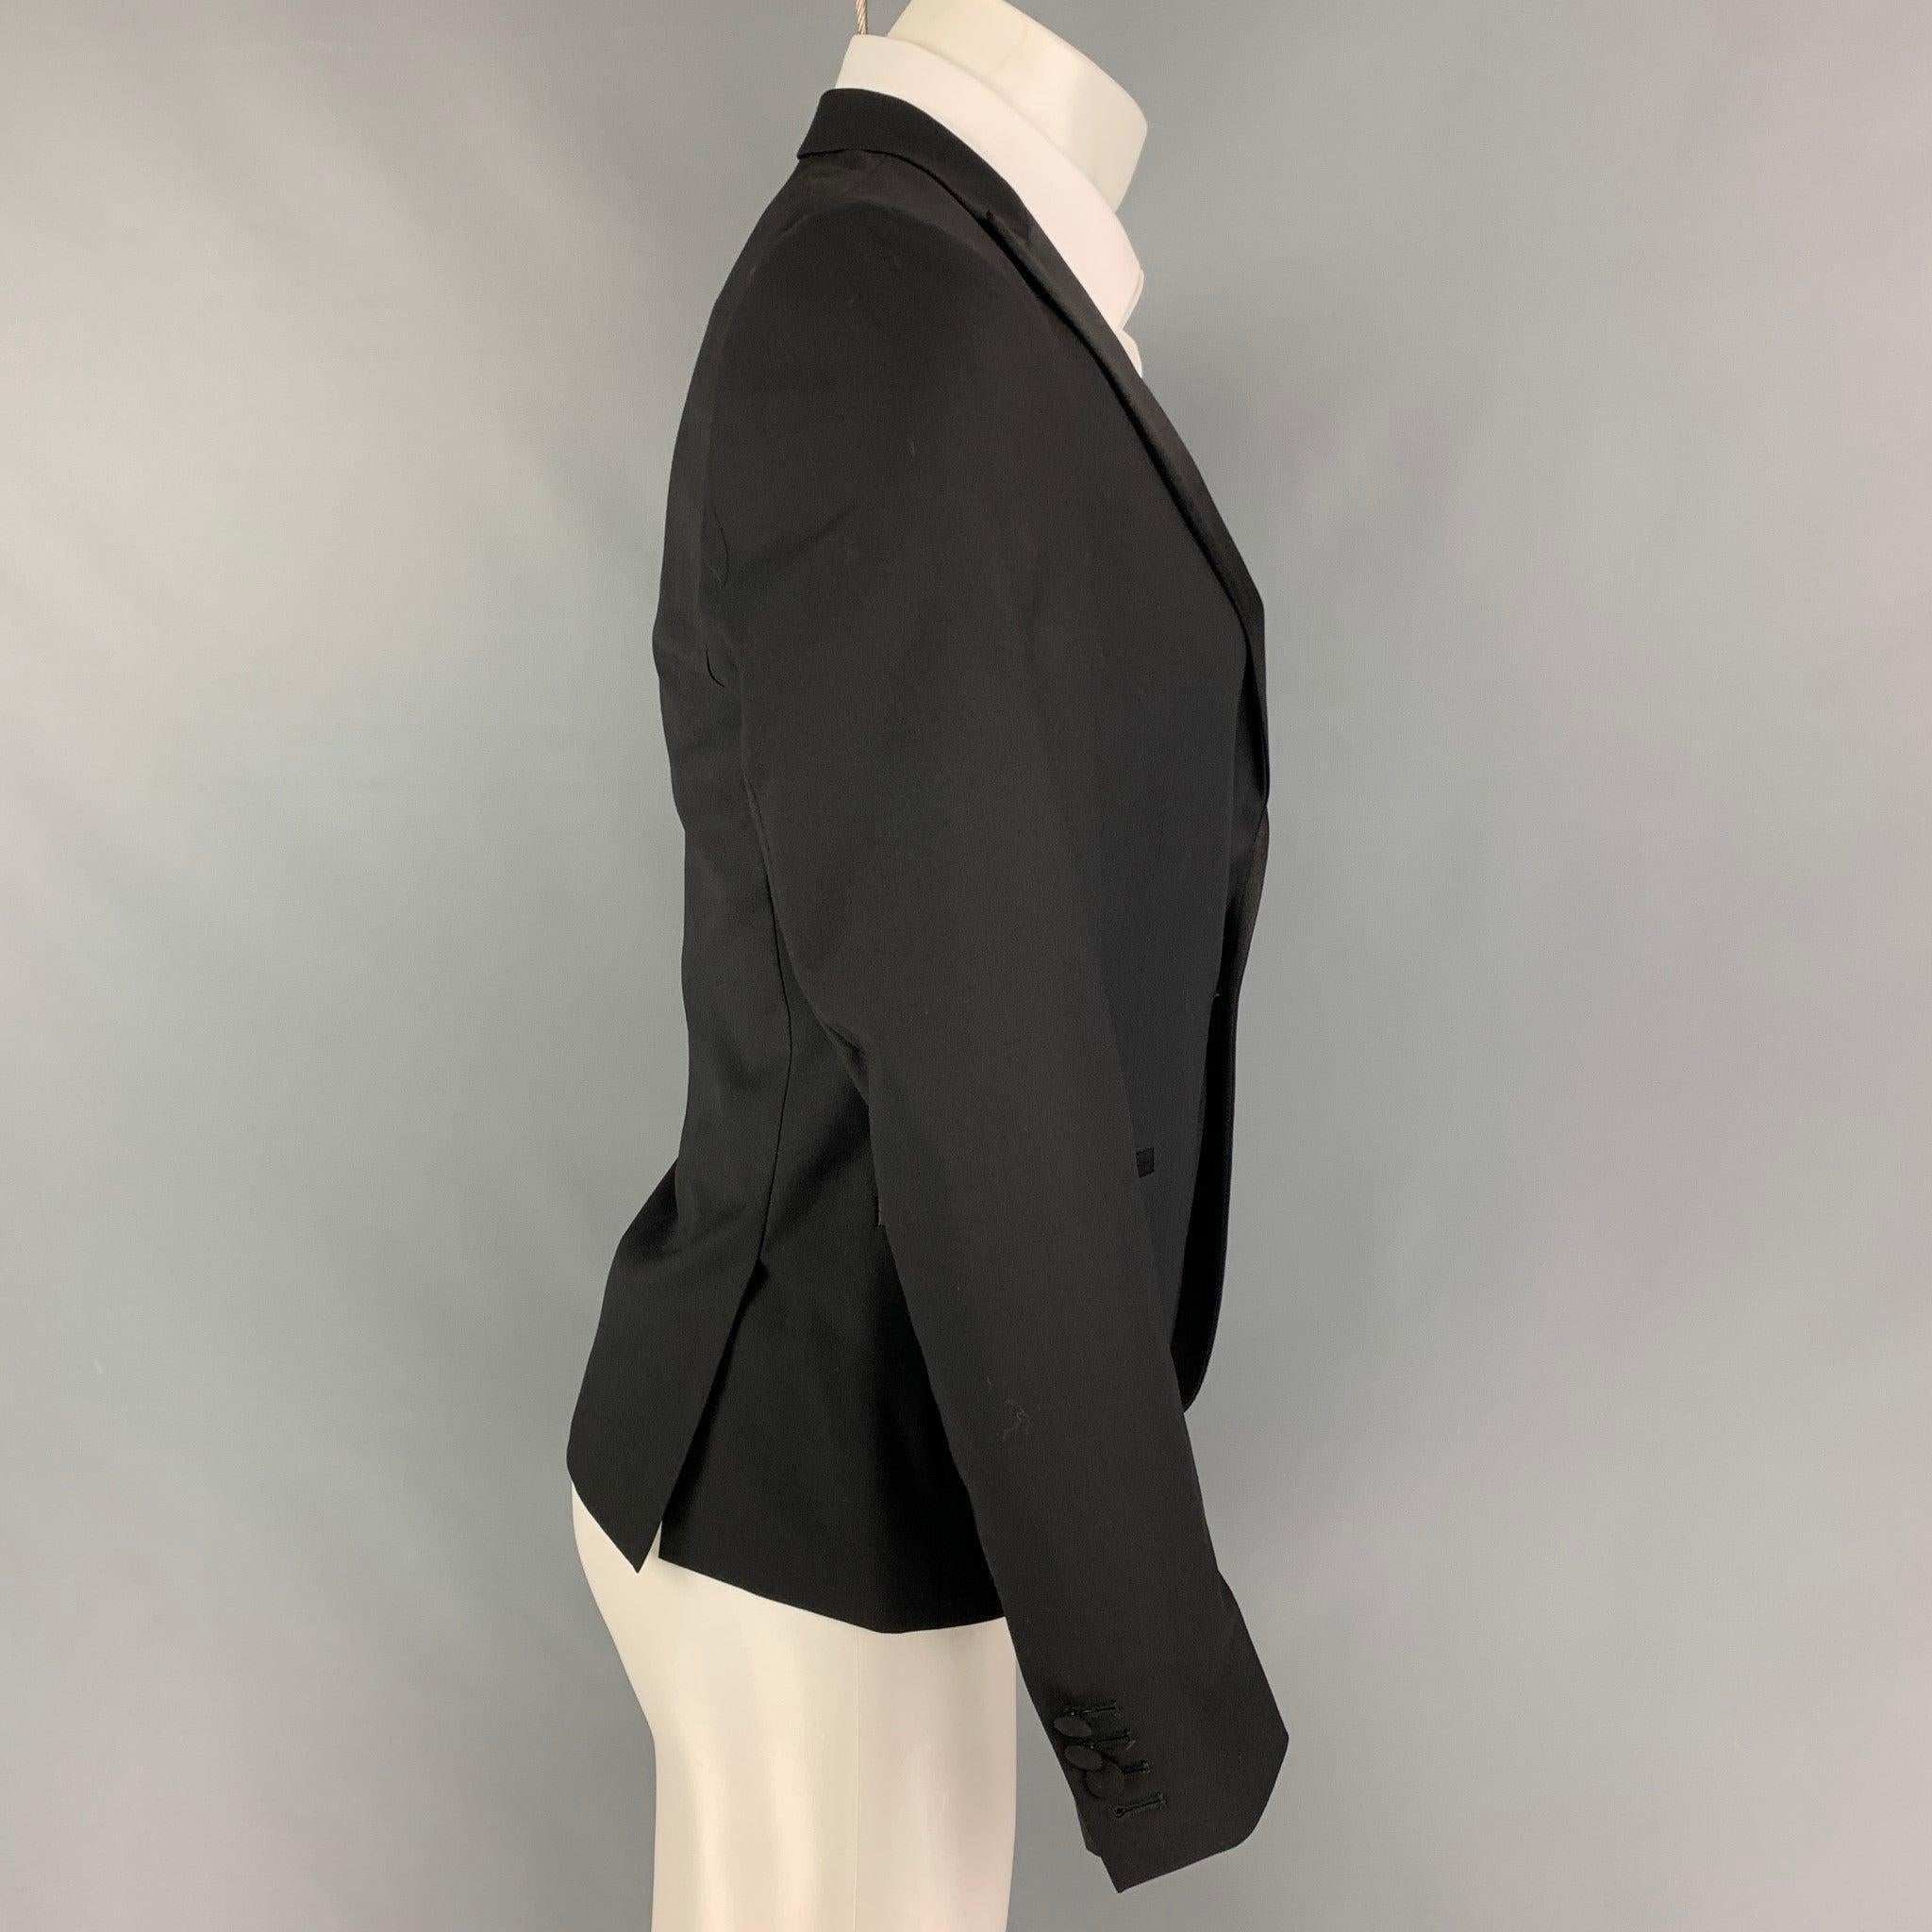 THE KOOPLES sport coat comes in a black wool with a full liner featuring a peak lapel, slit pockets, double back vent, and a single button closure.
Very Good
Pre-Owned Condition. 

Marked:   46 

Measurements: 
 
Shoulder: 16.5 inches  Chest: 38